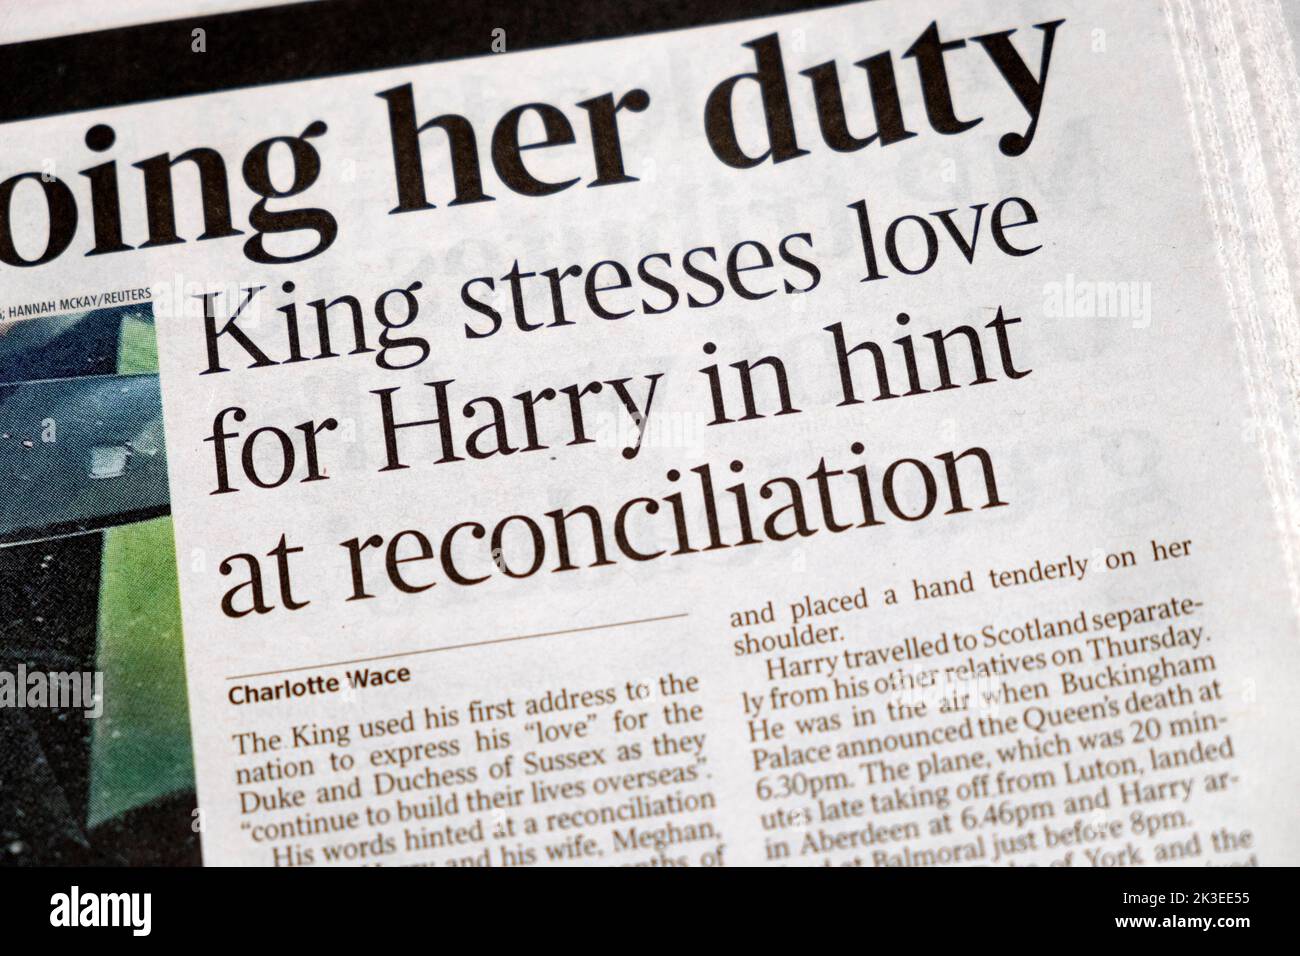 'King stresses love for Harry in hint at reconciliation' The Times newspaper headline article clipping King Charles III Prince Harry 10 September 2022 Stock Photo